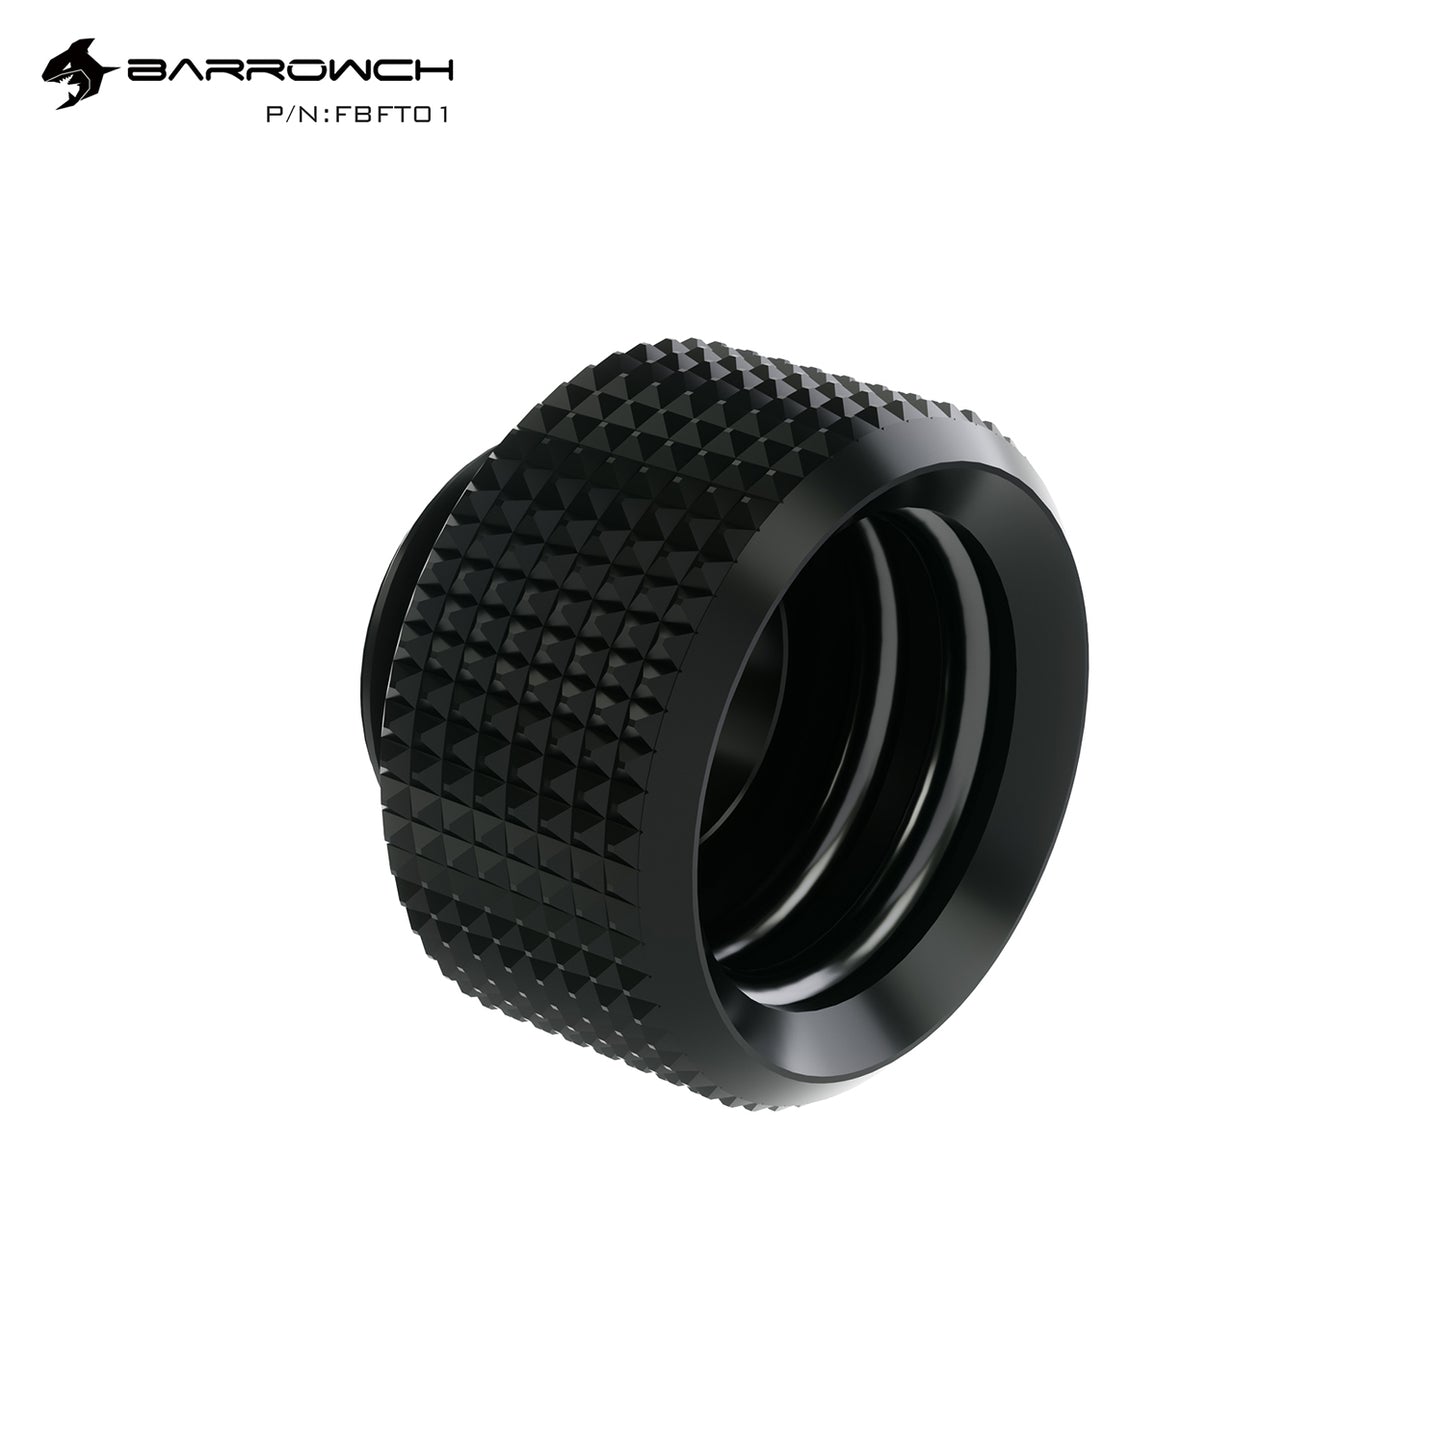 Barrowch OD14mm Hard Tube Fitting, G1/4" Compression Connector, Water Cooling Hard Tubing Compression Adapter, FBFT01